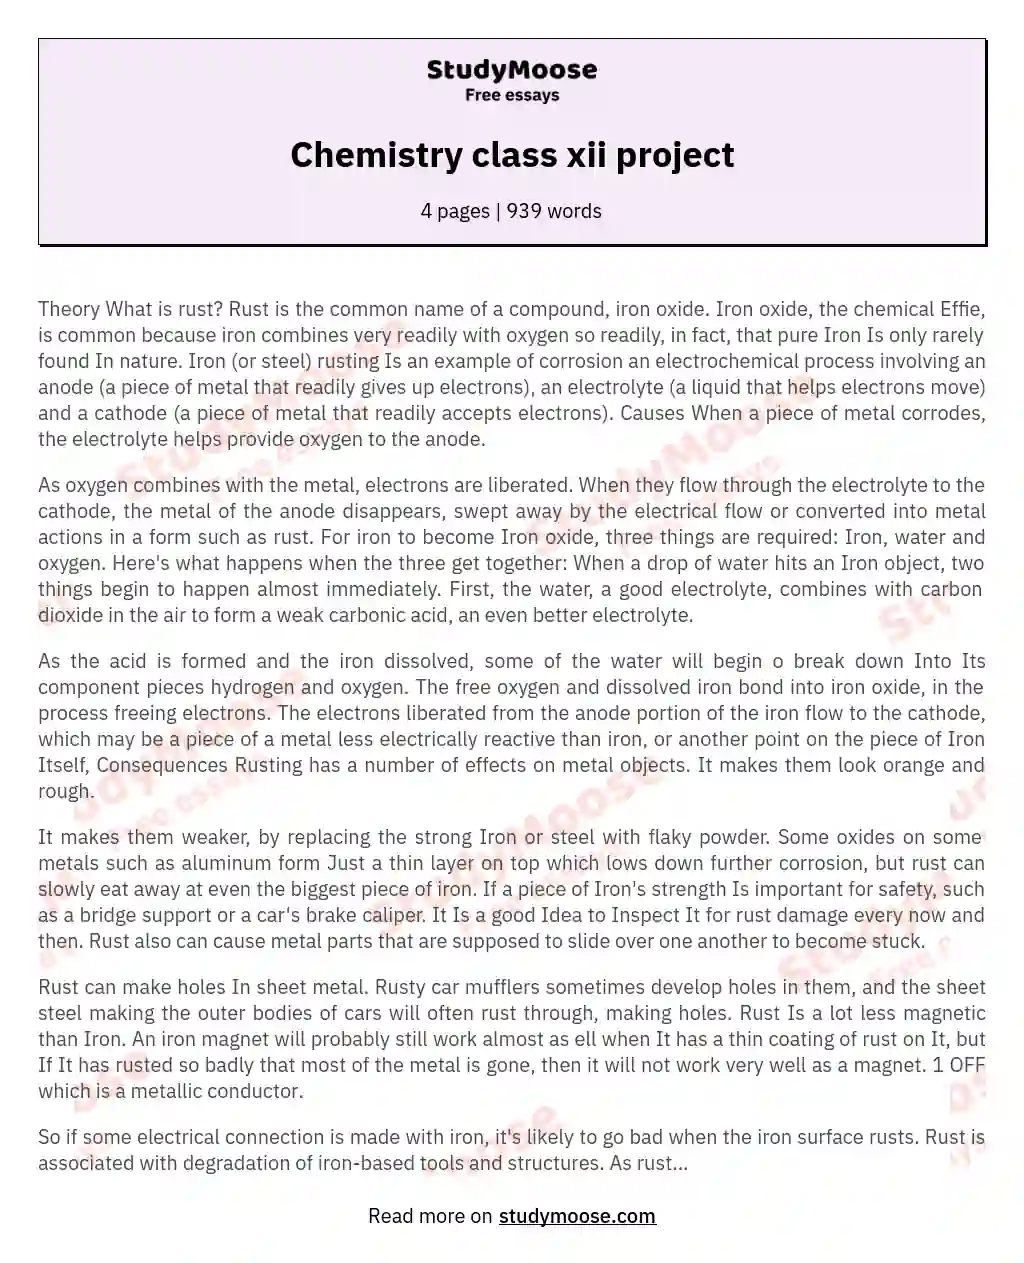 Chemistry class xii project essay